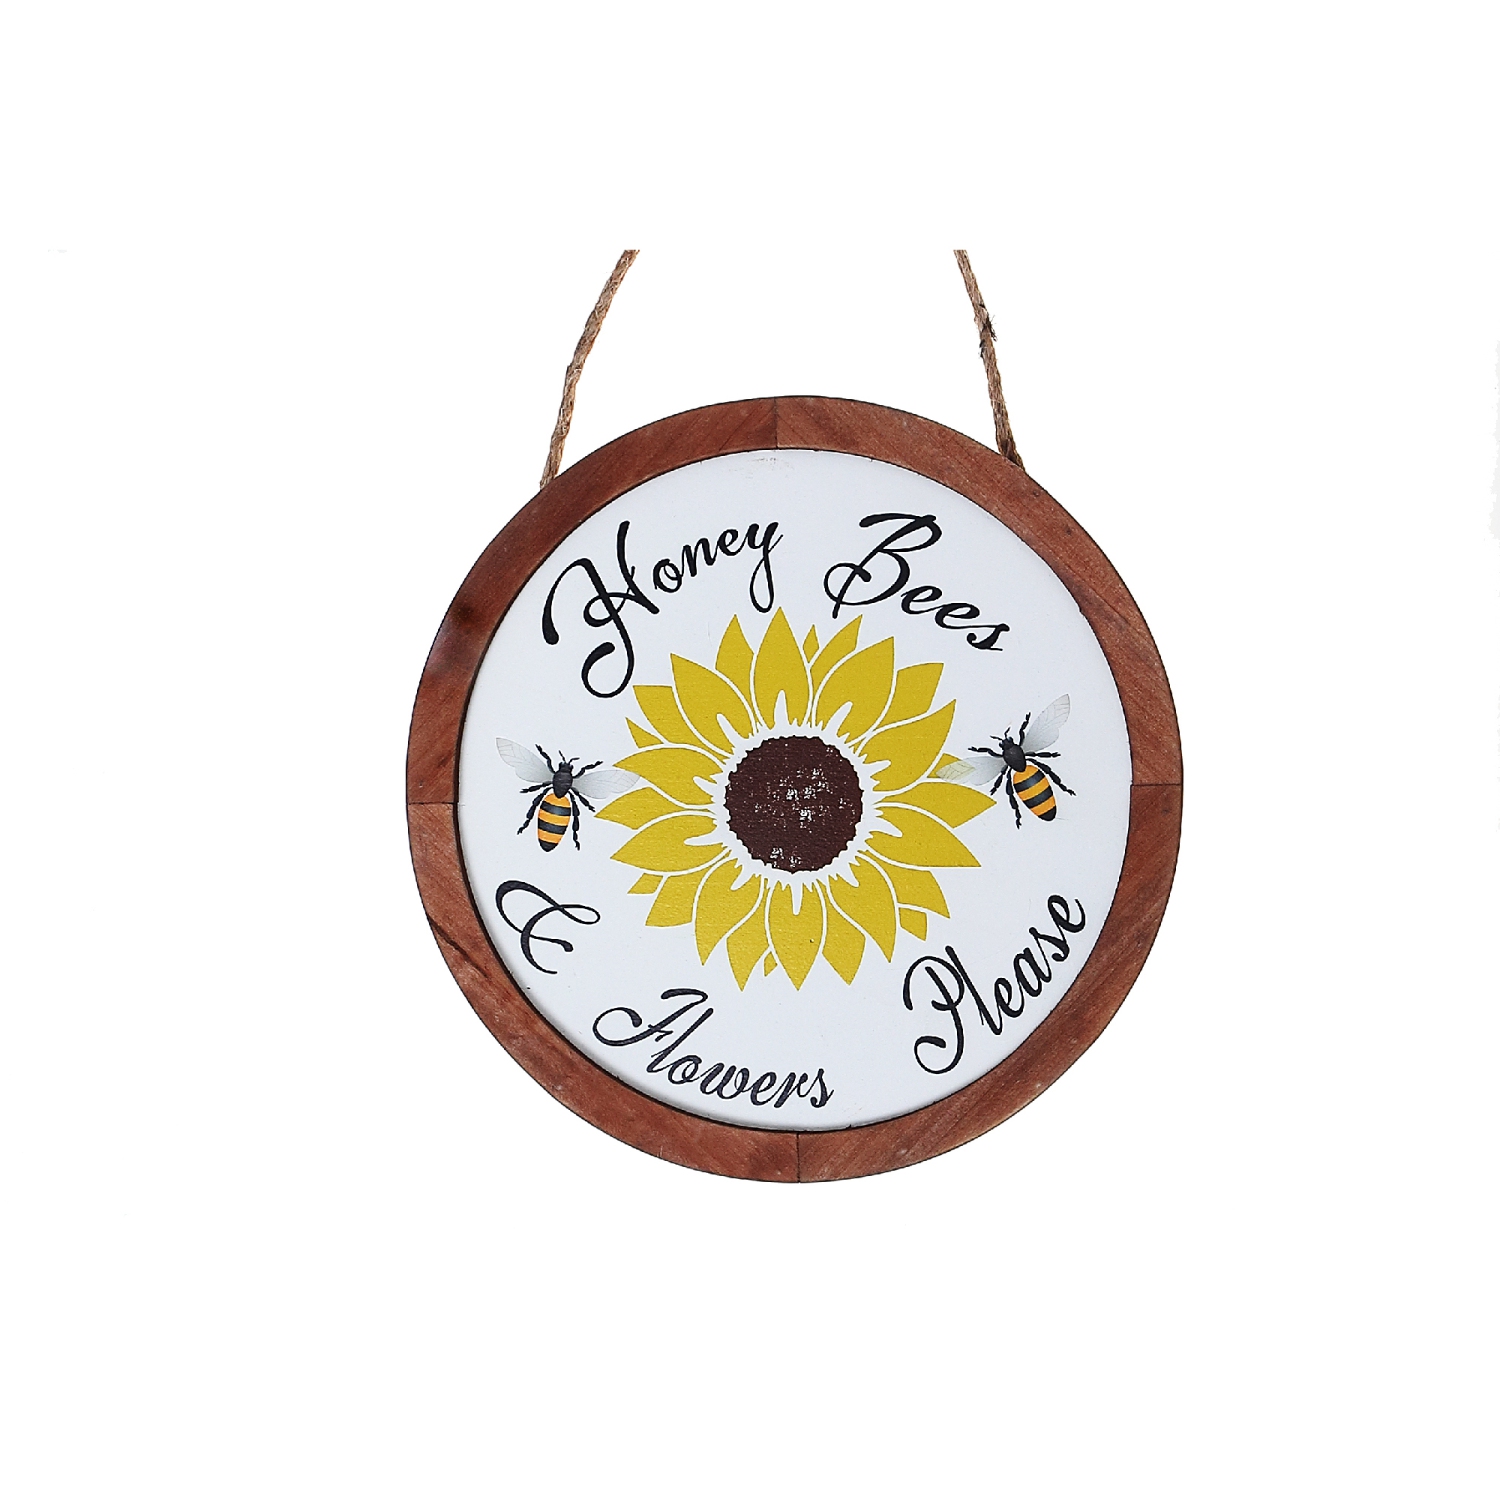 Maison Concepts Framed Round Wood Sign Honey Bees & Flowers Please